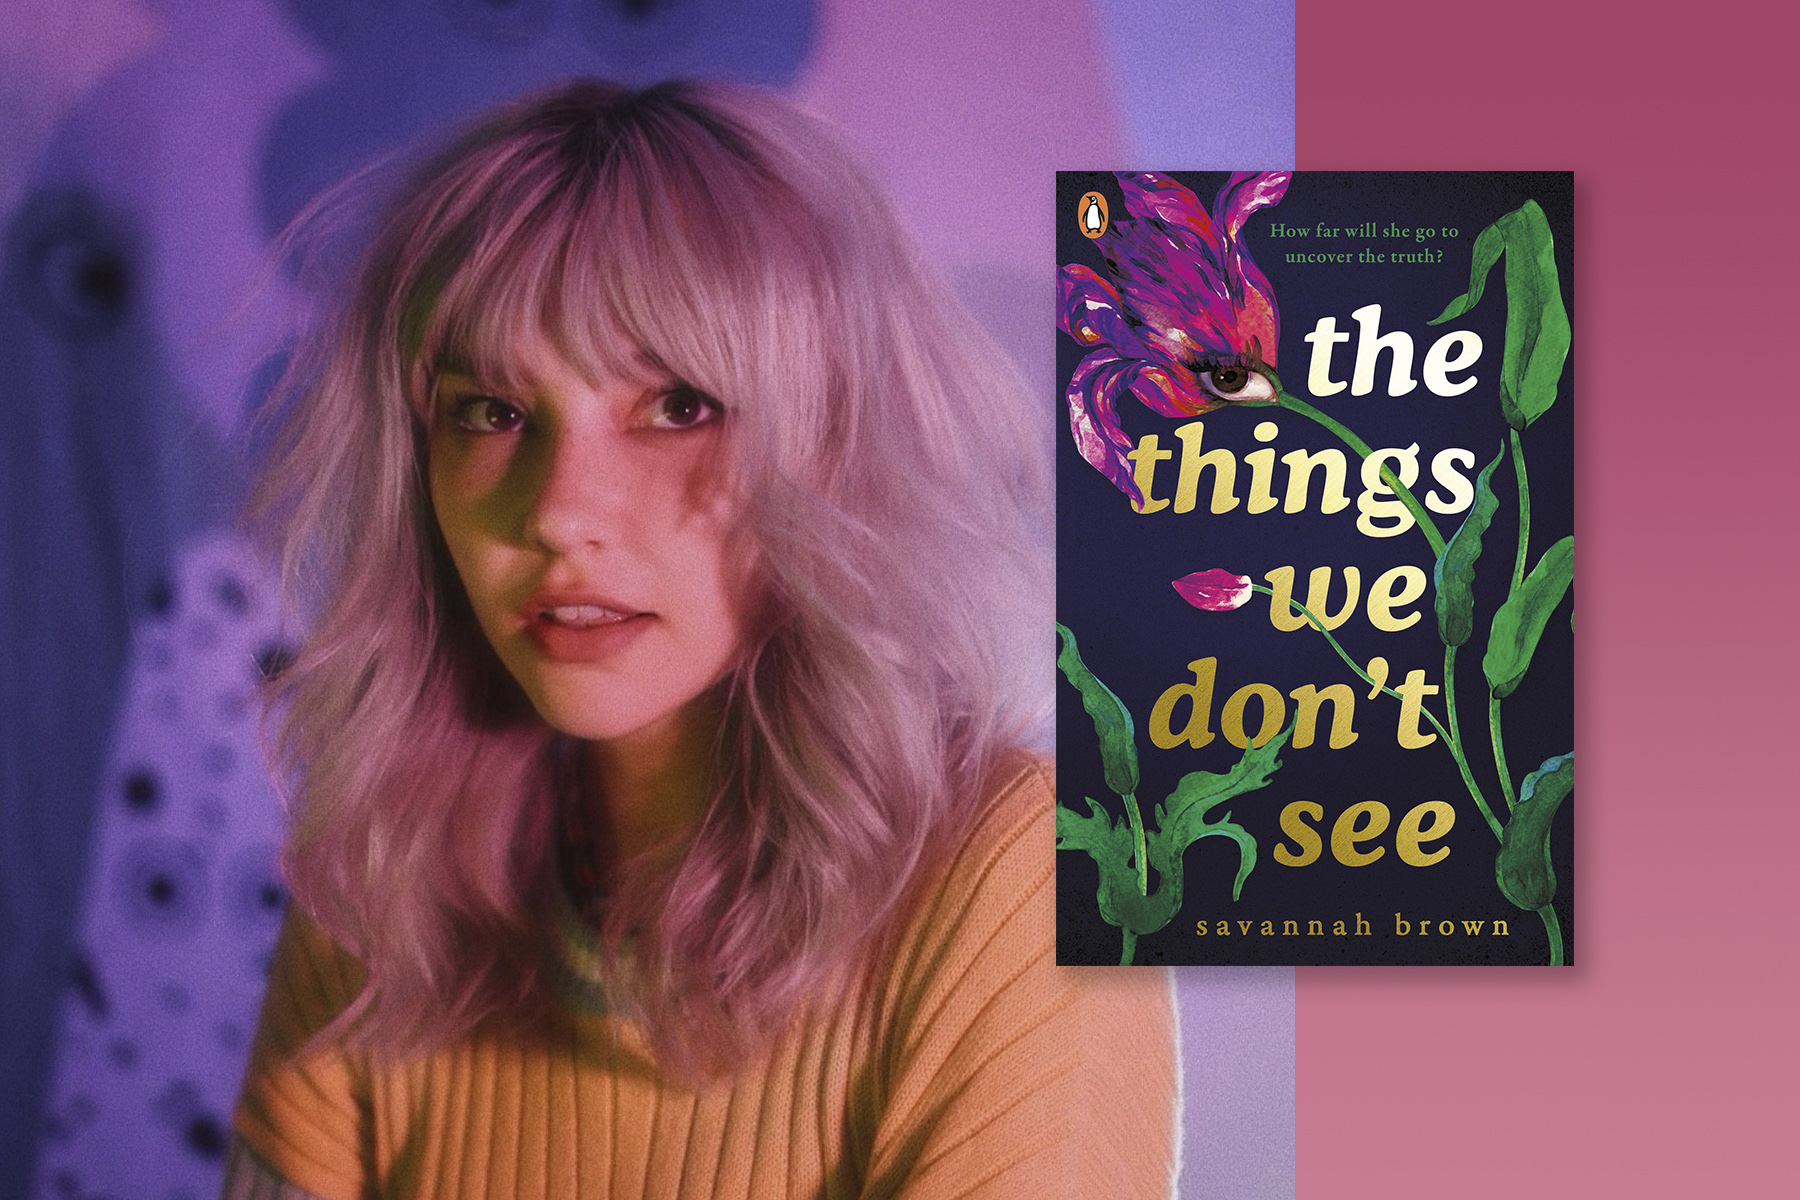 A photo of author Savannah Brown next to the cover of her new book The Things We Don't See on a grey and pink background